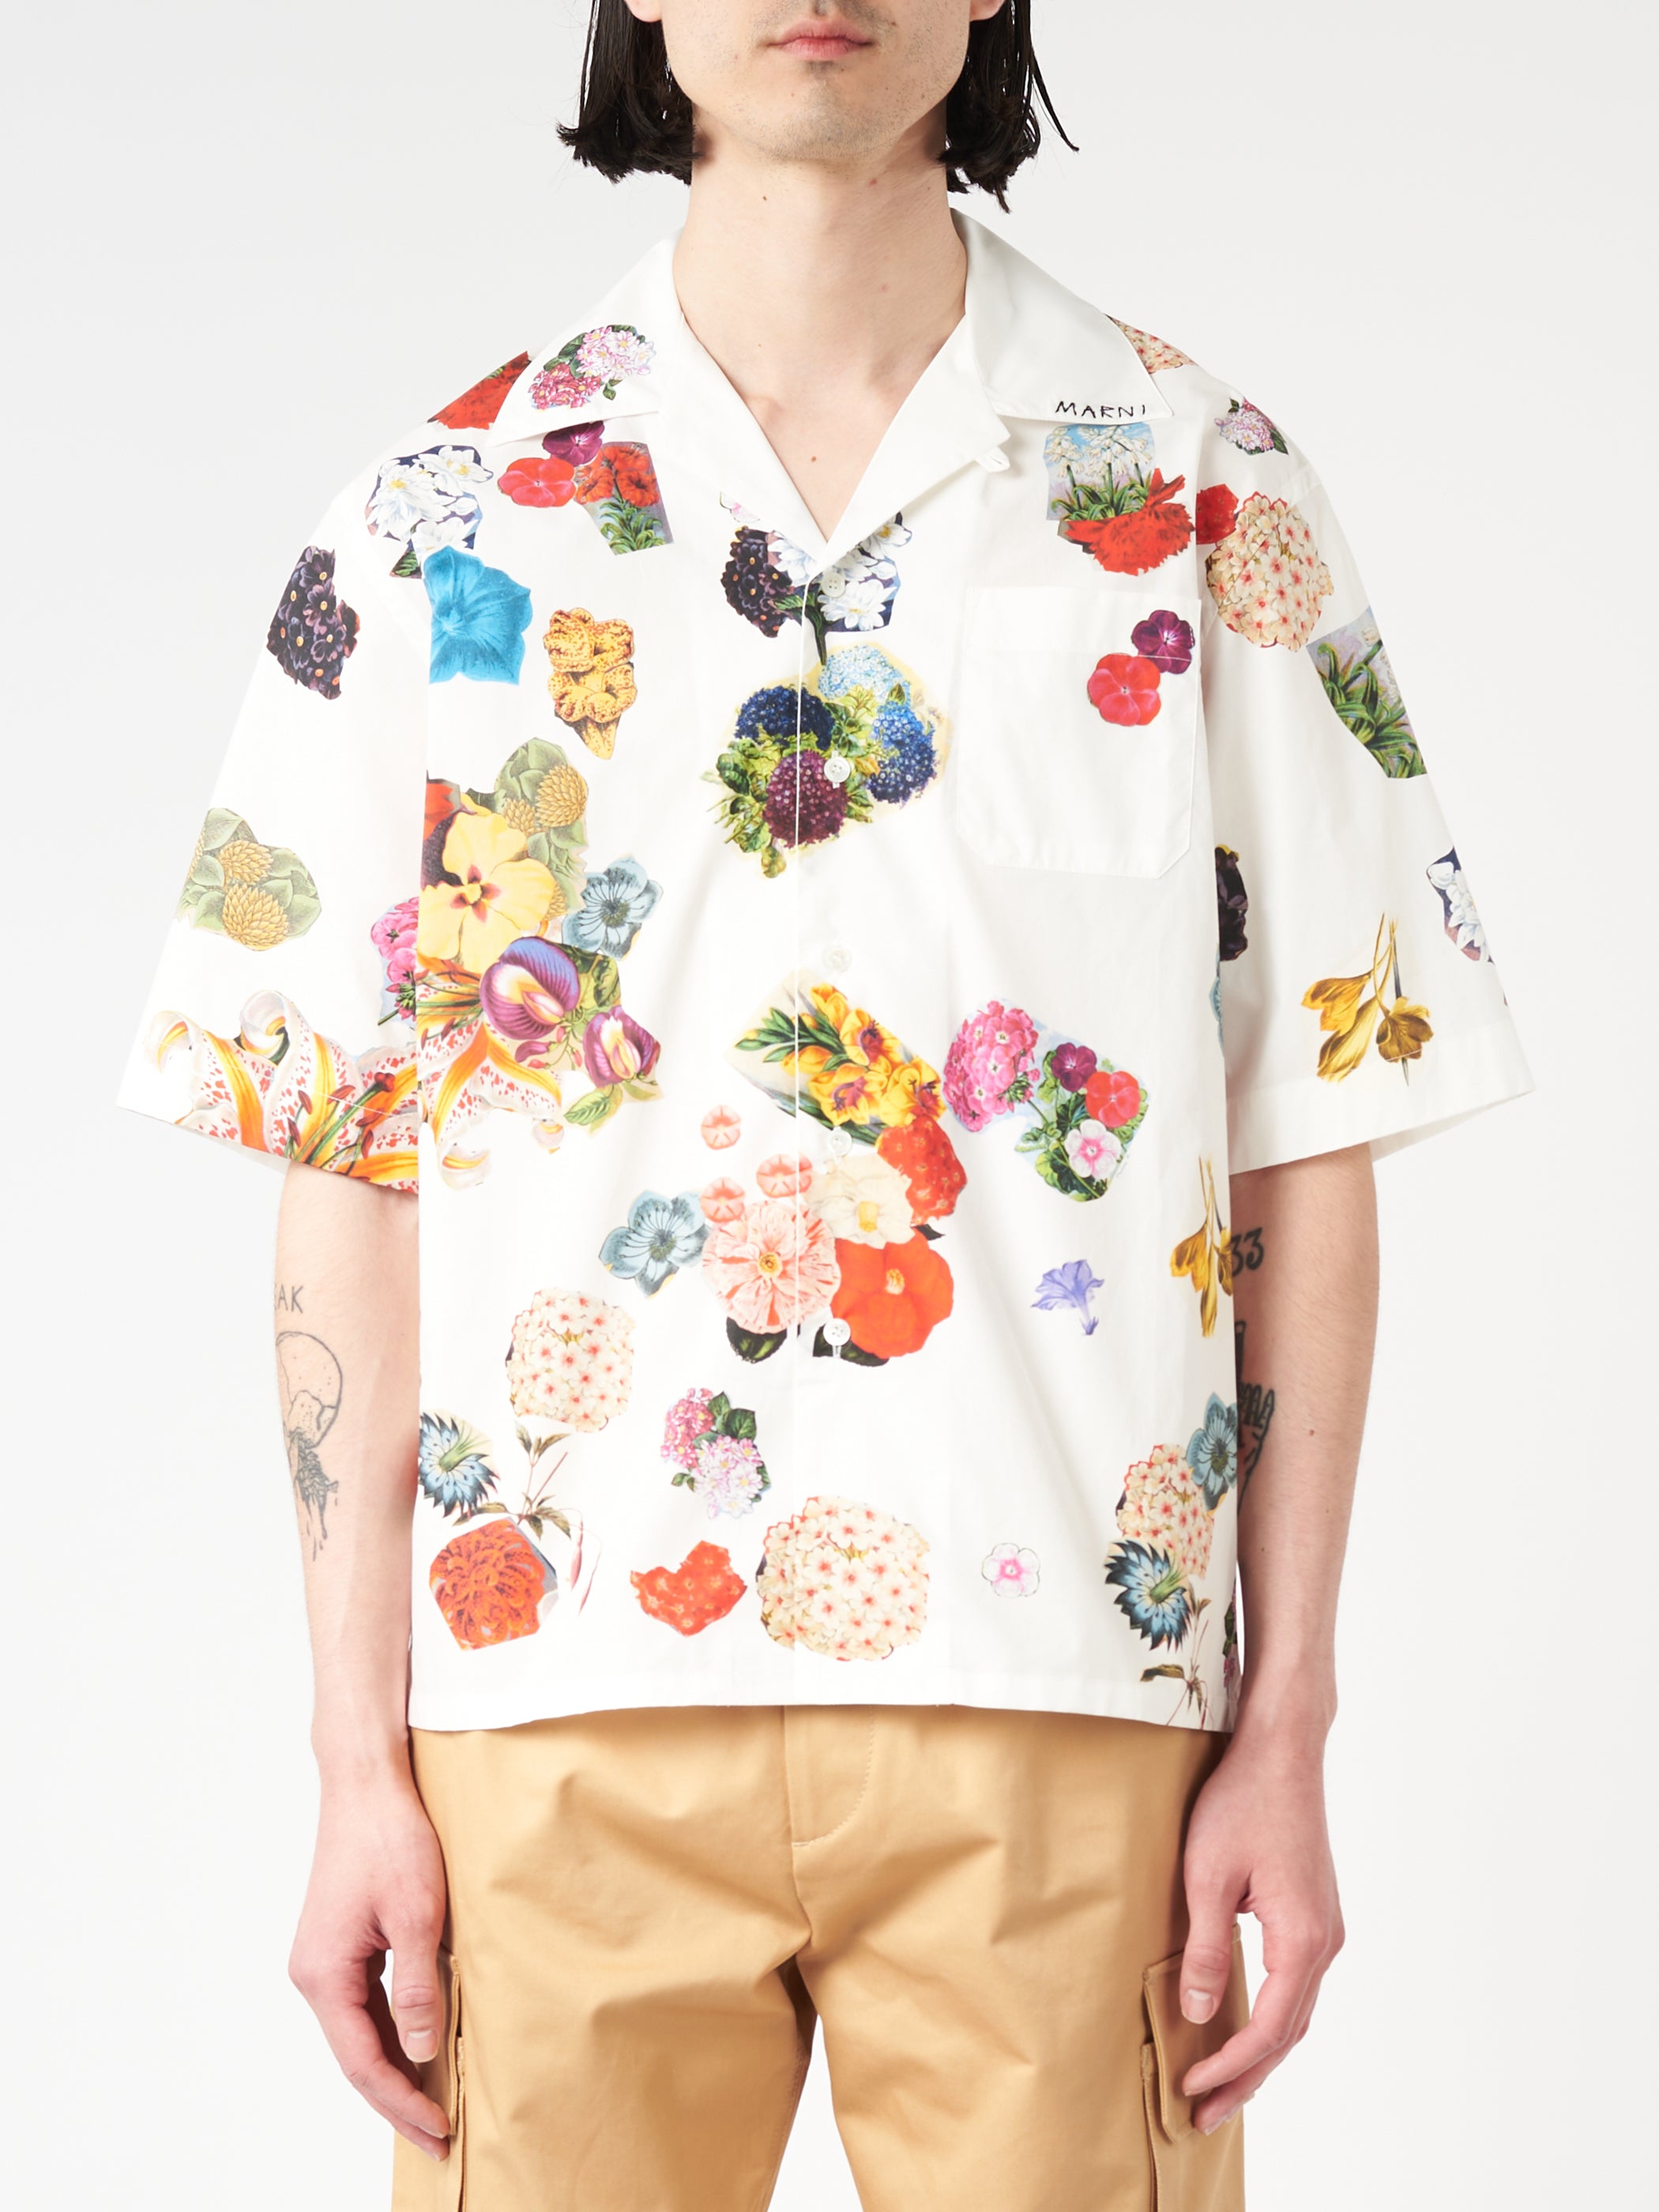 Bowling Shirt with Flower Prints